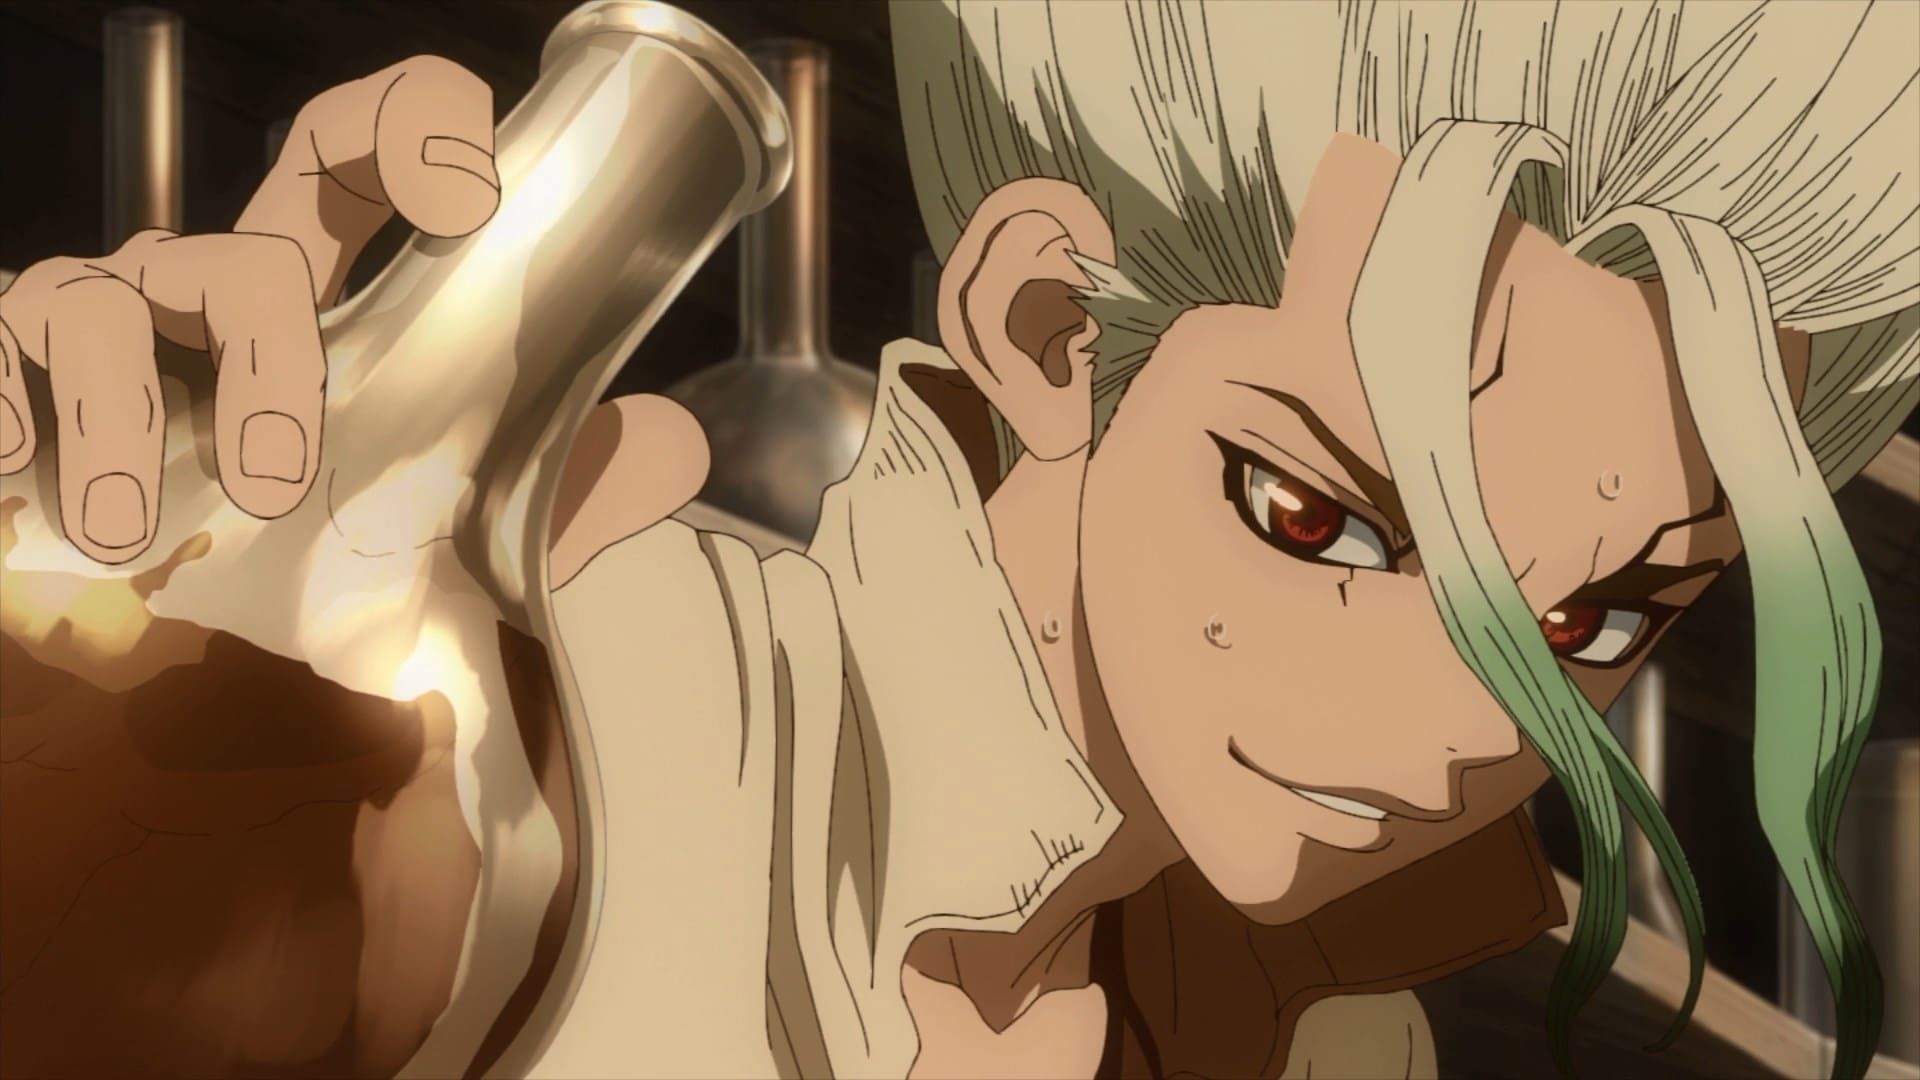 Dr. Stone background